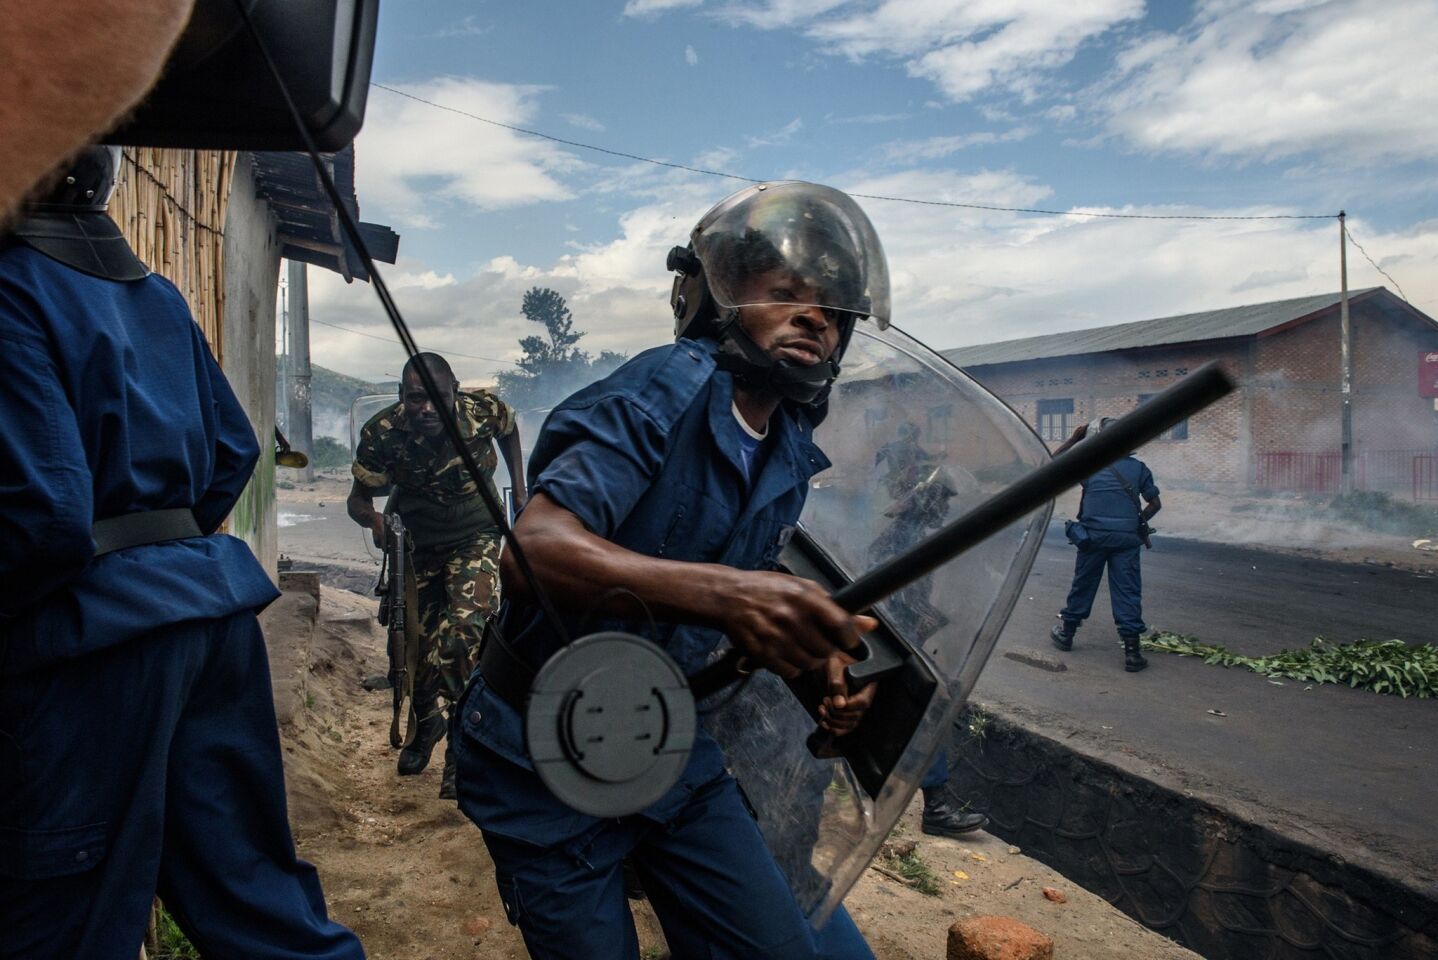 Police and soldiers run after protesters who were throwing rocks in Bujumbura, Burundi.